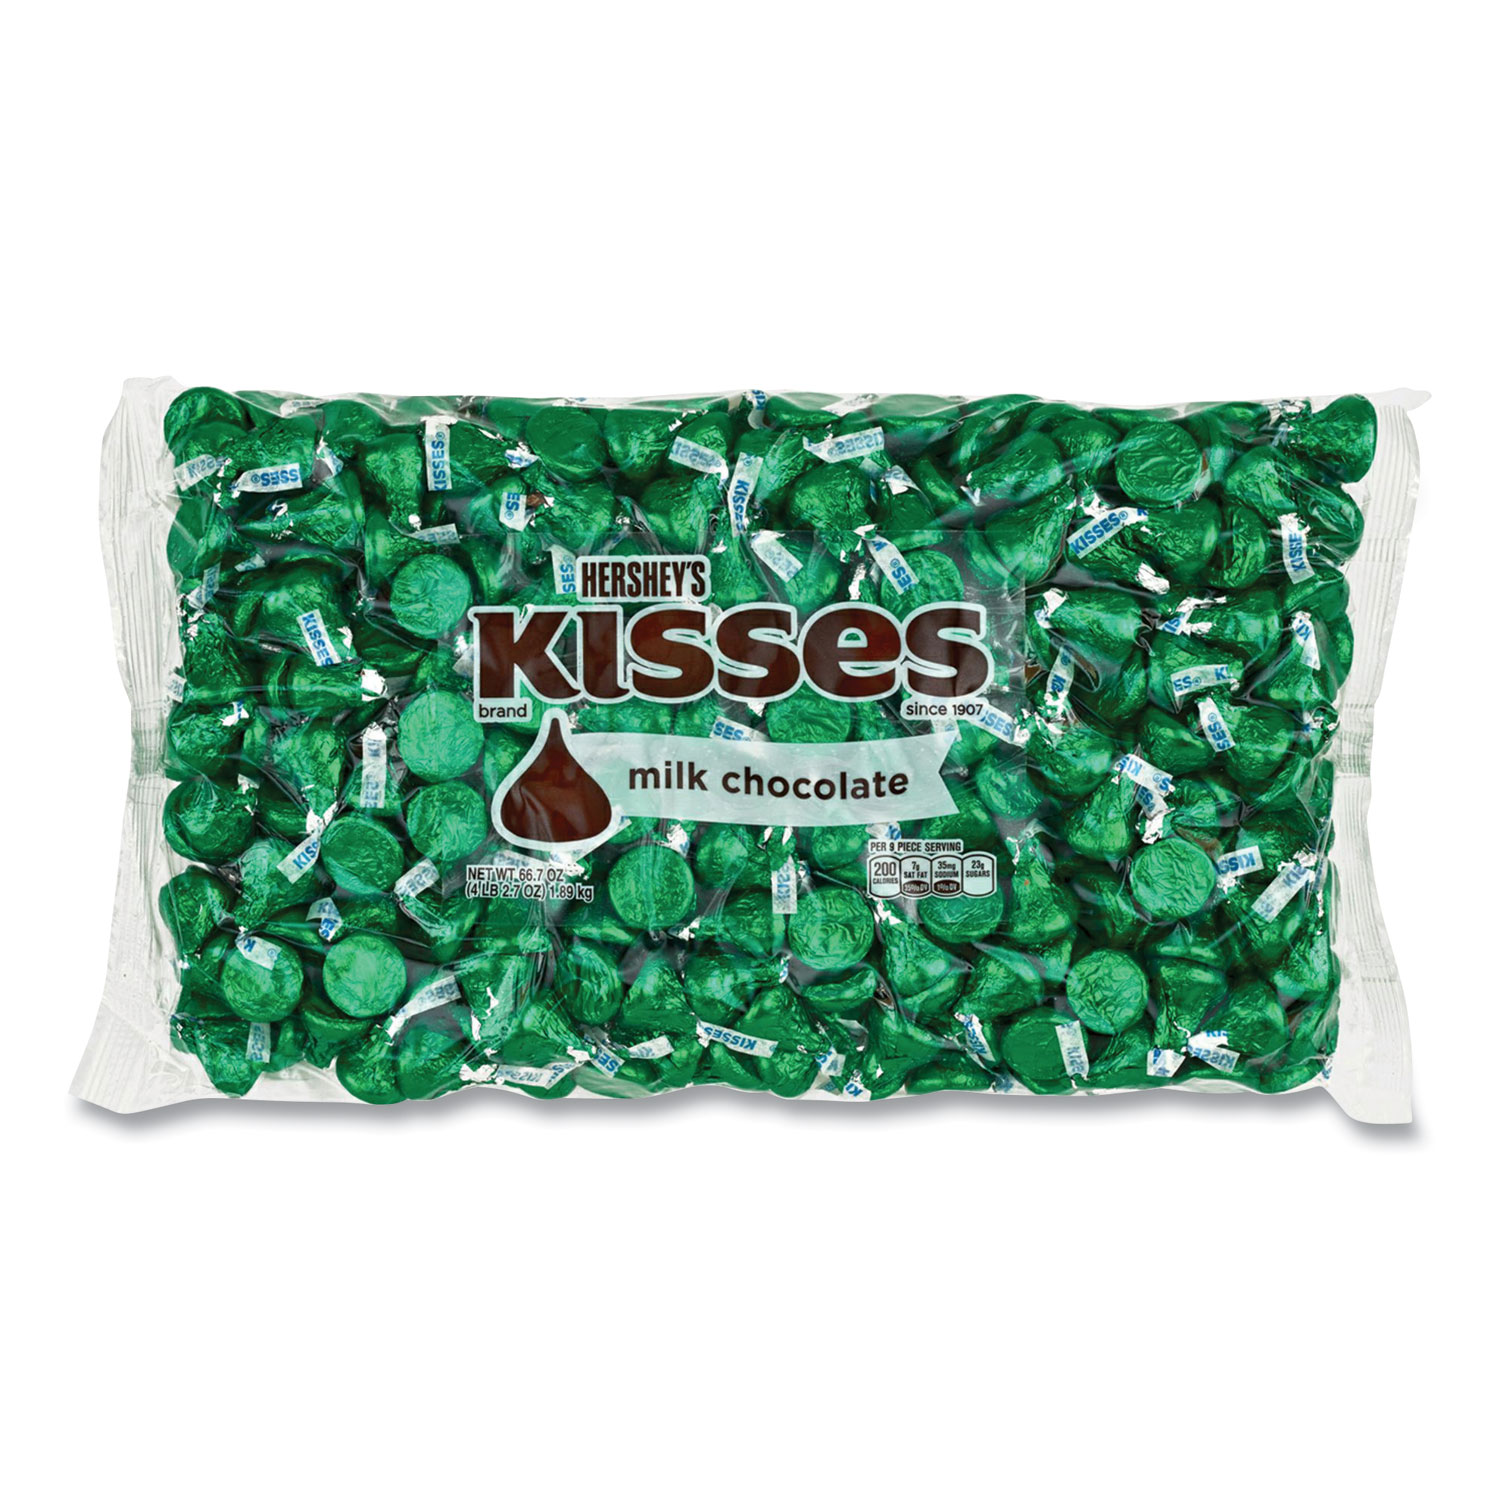  Hershey's 16034 KISSES, Milk Chocolate, Green Wrappers, 66.7 oz Bag, Free Delivery in 1-4 Business Days (GRR24600087) 